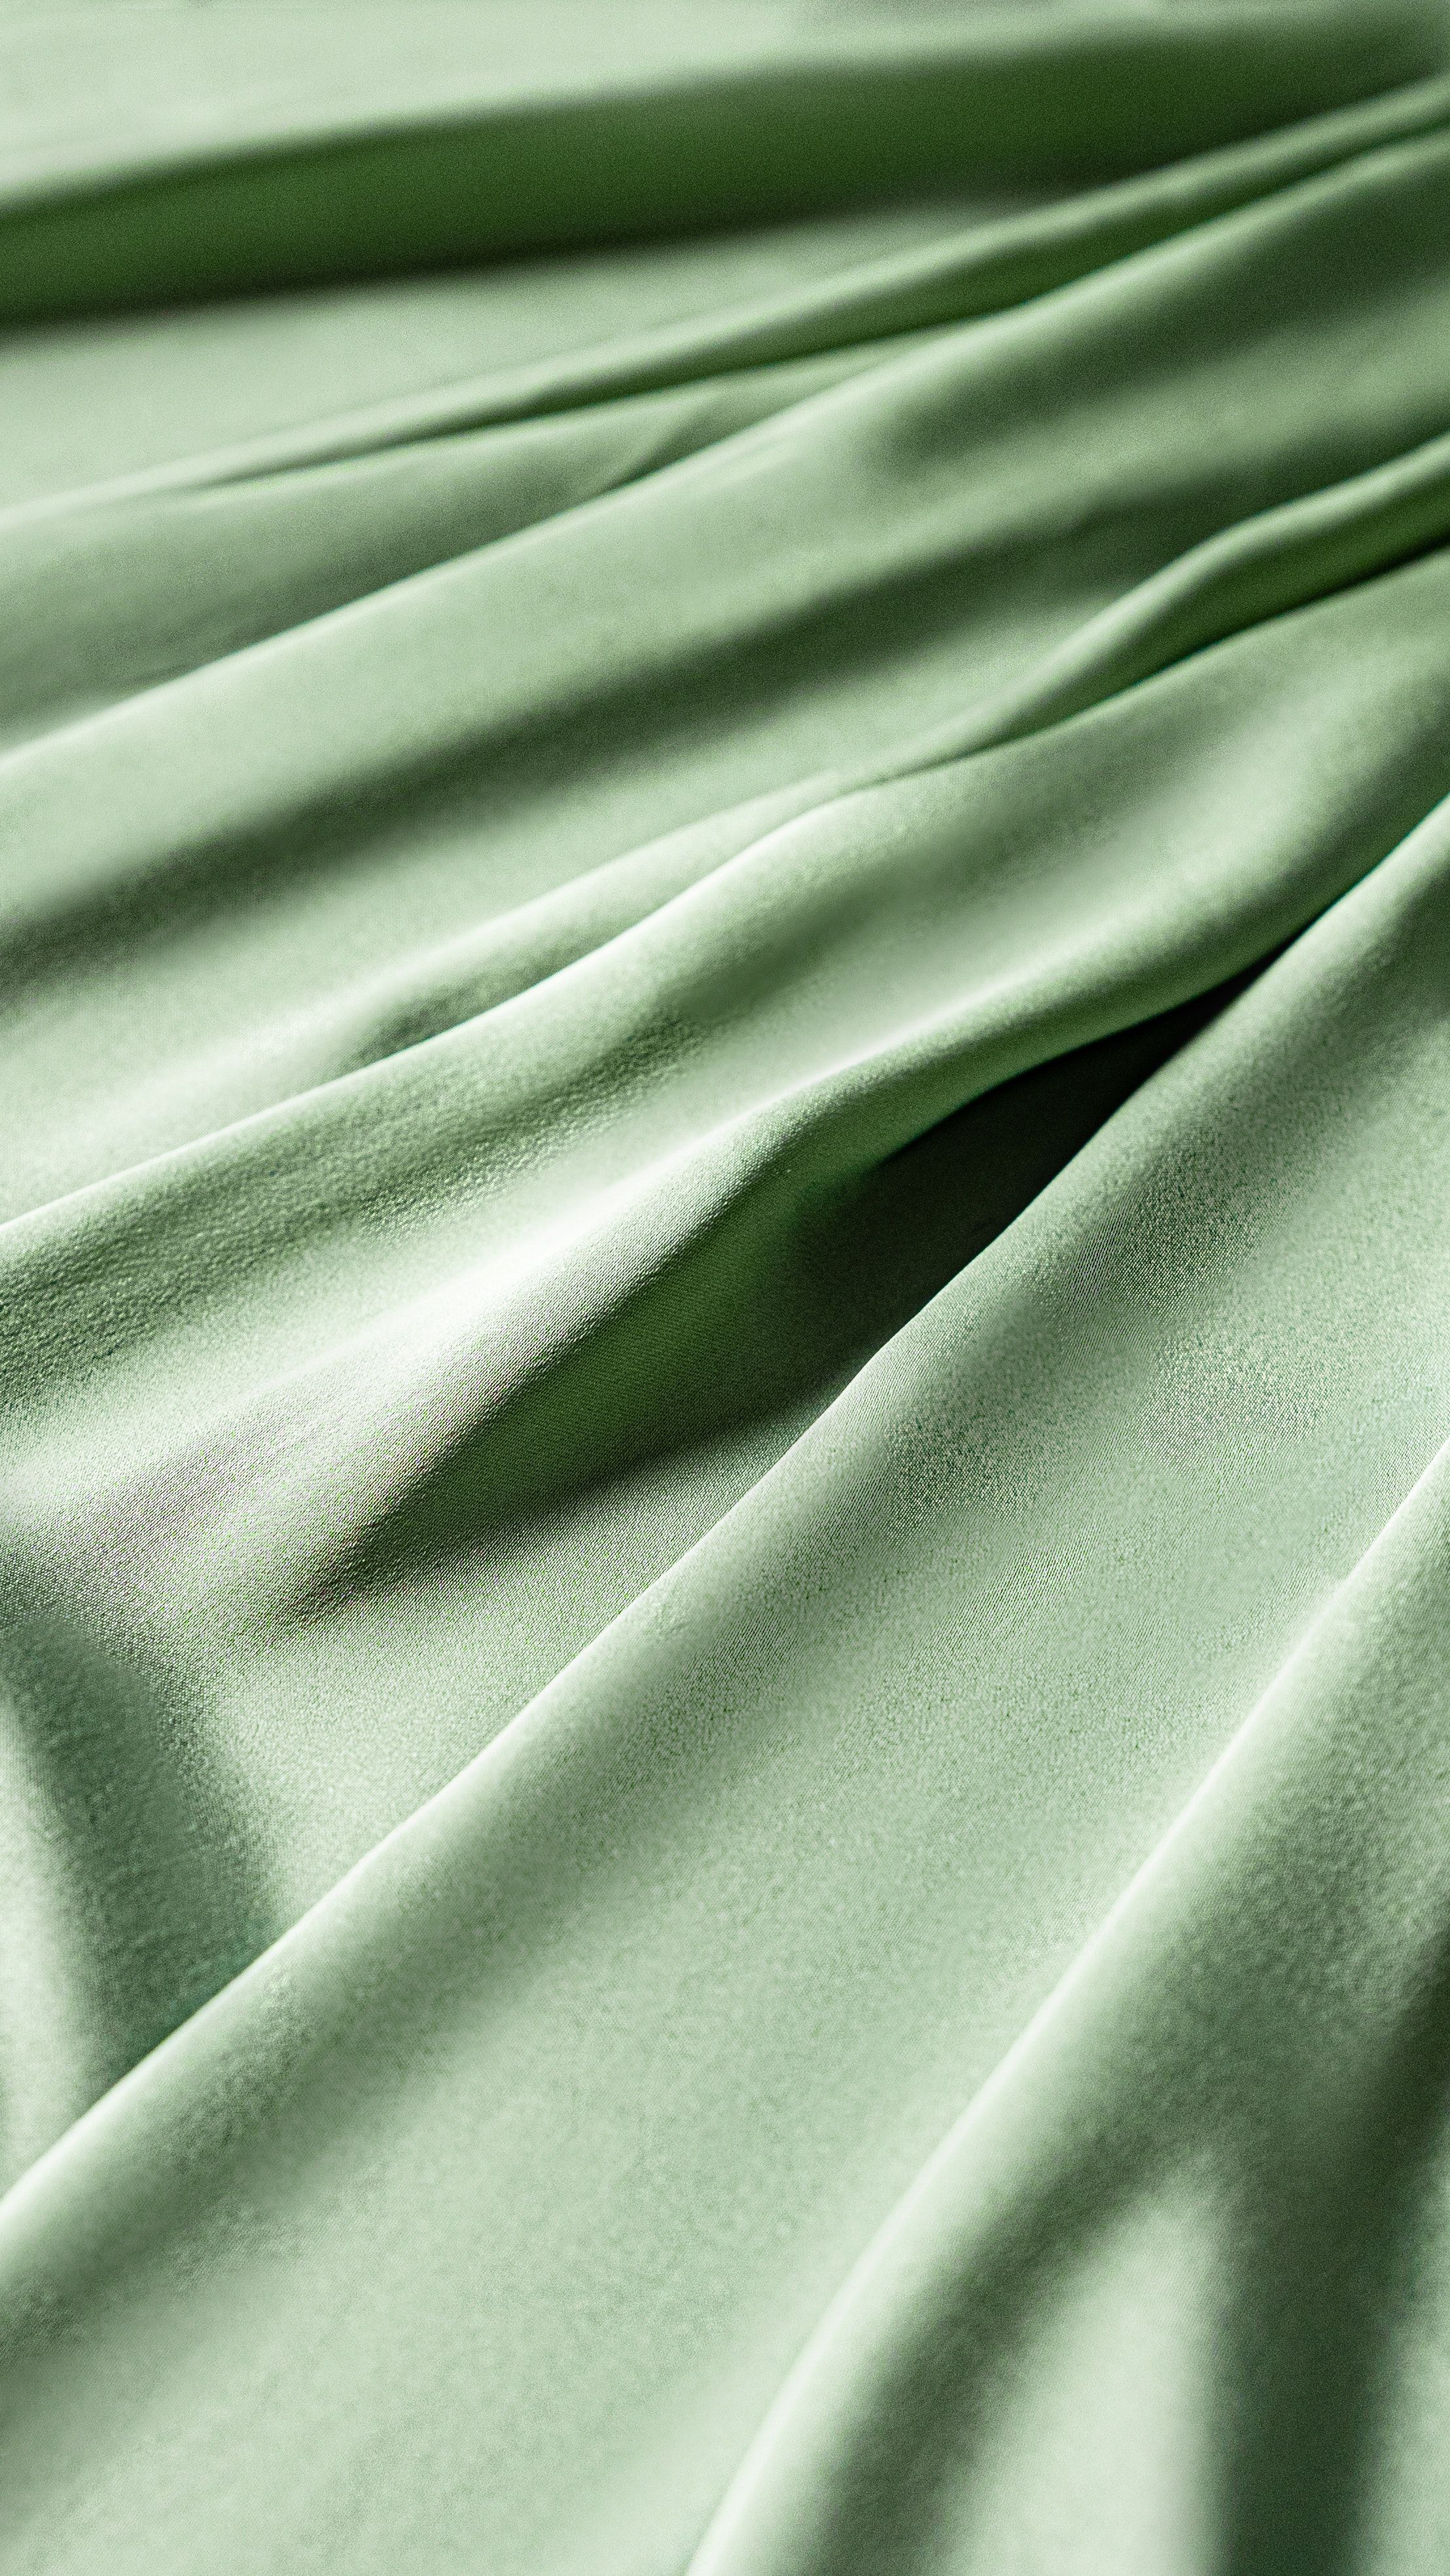 Photograph of a Green Cloth · Free